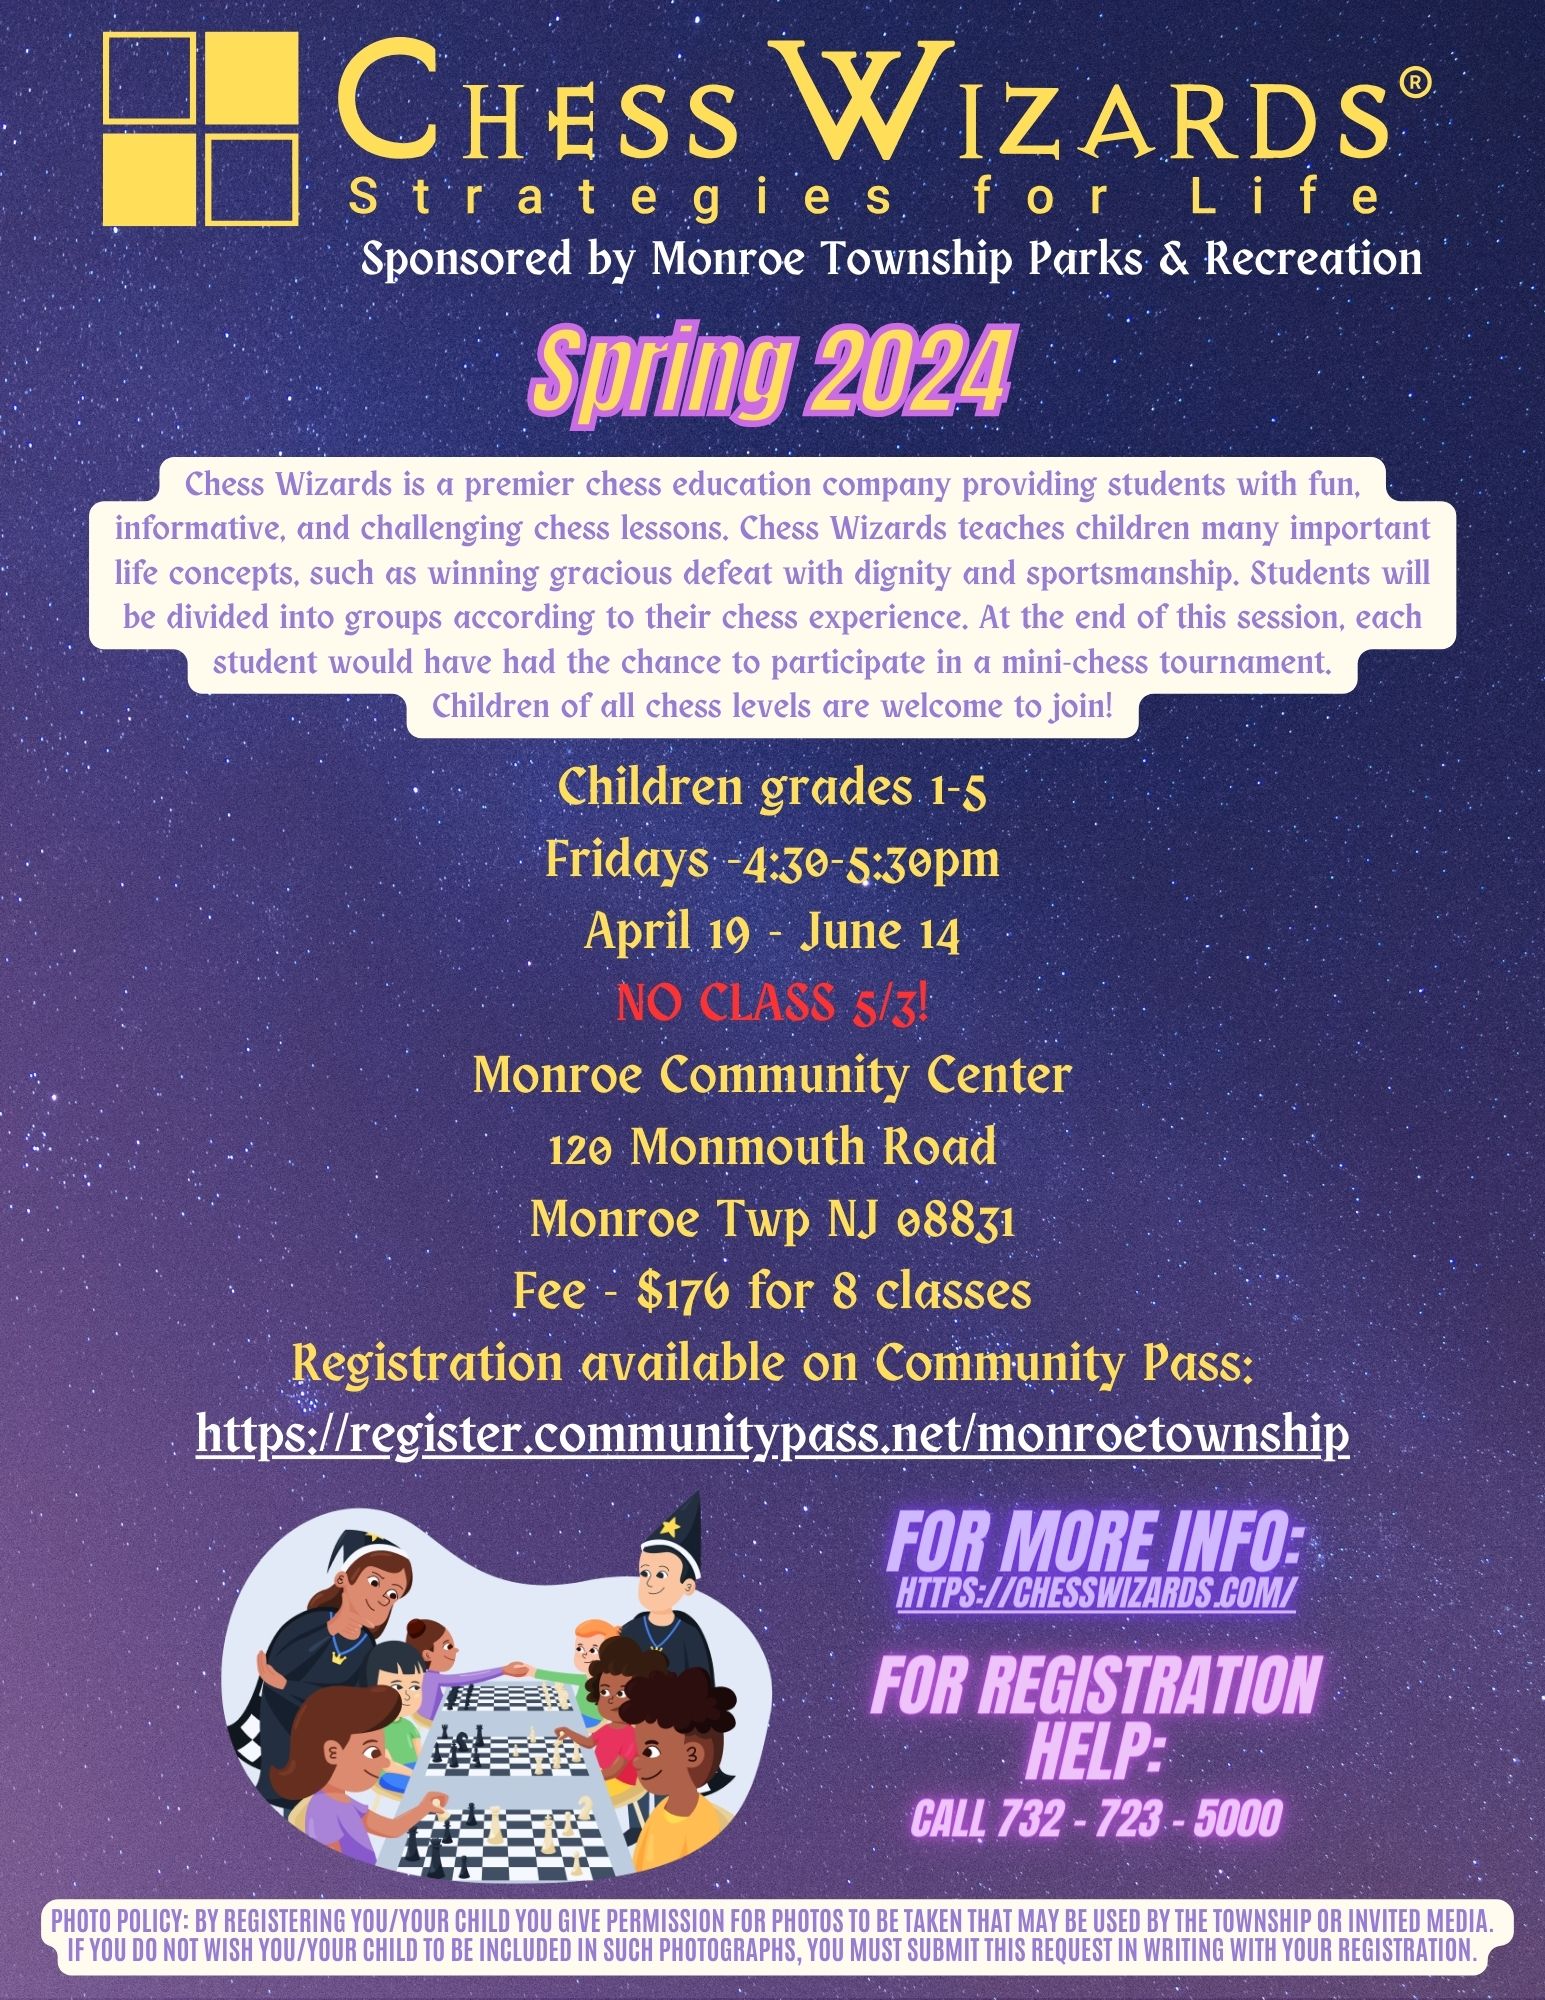 CHESS WIZARDS SPRING 2024 UPDATE